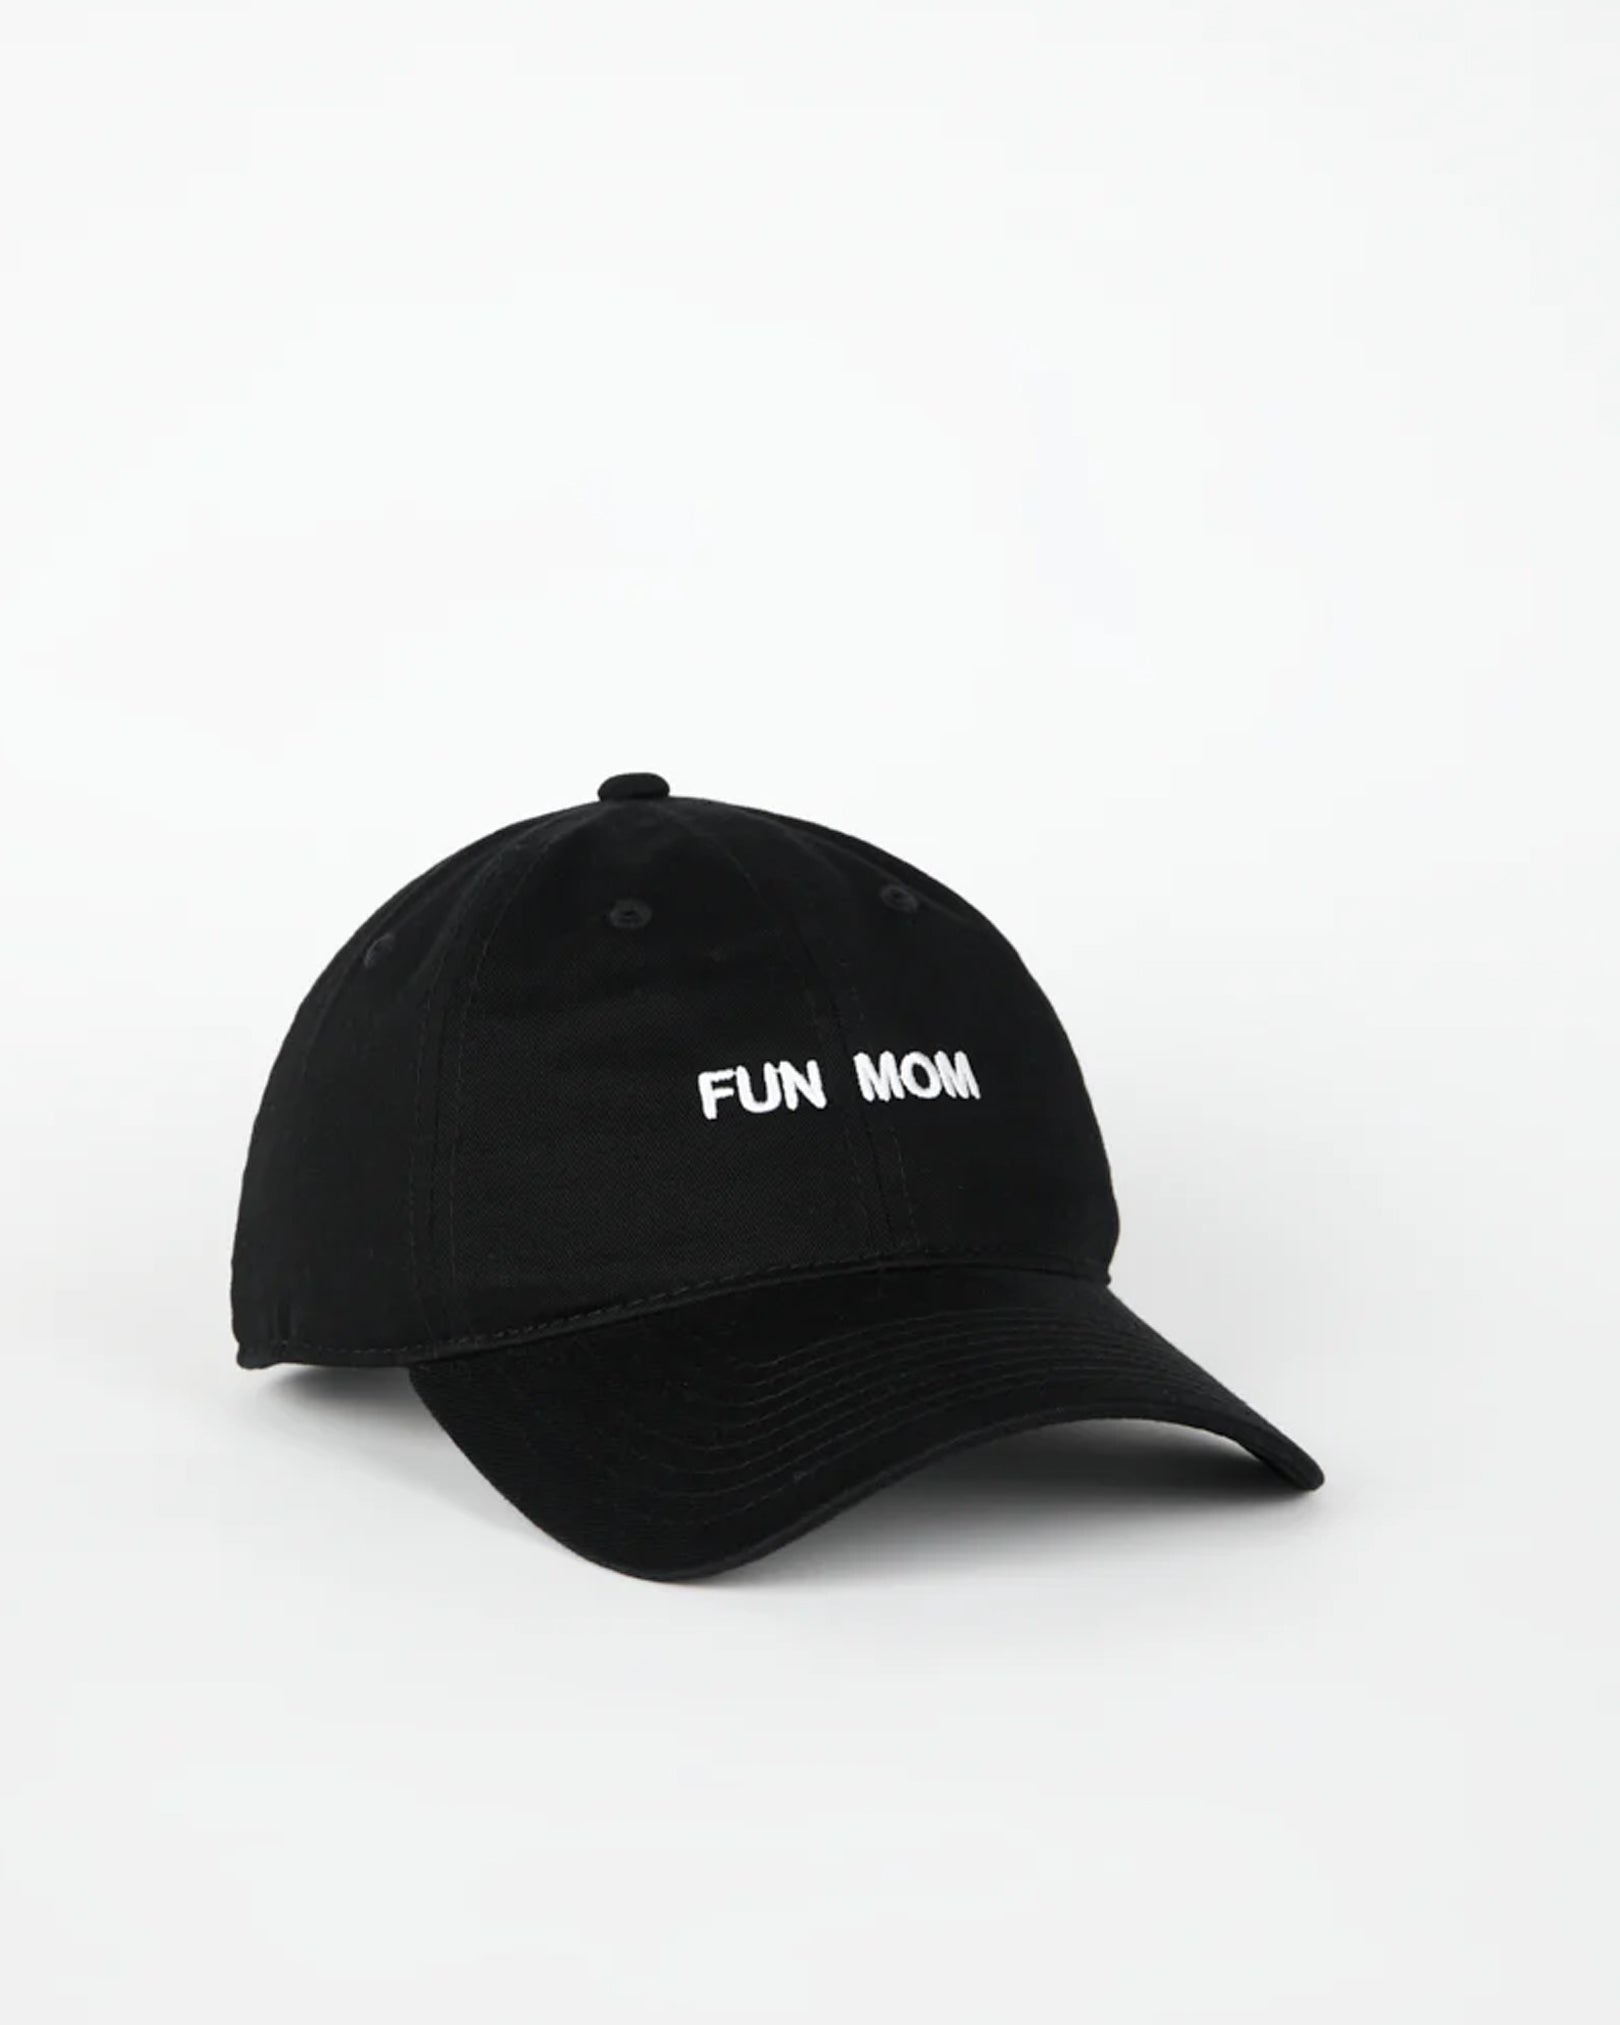 INTENTIONALLY BLANK Slogan Cap in "Fun Mom" available at Lahn.shop